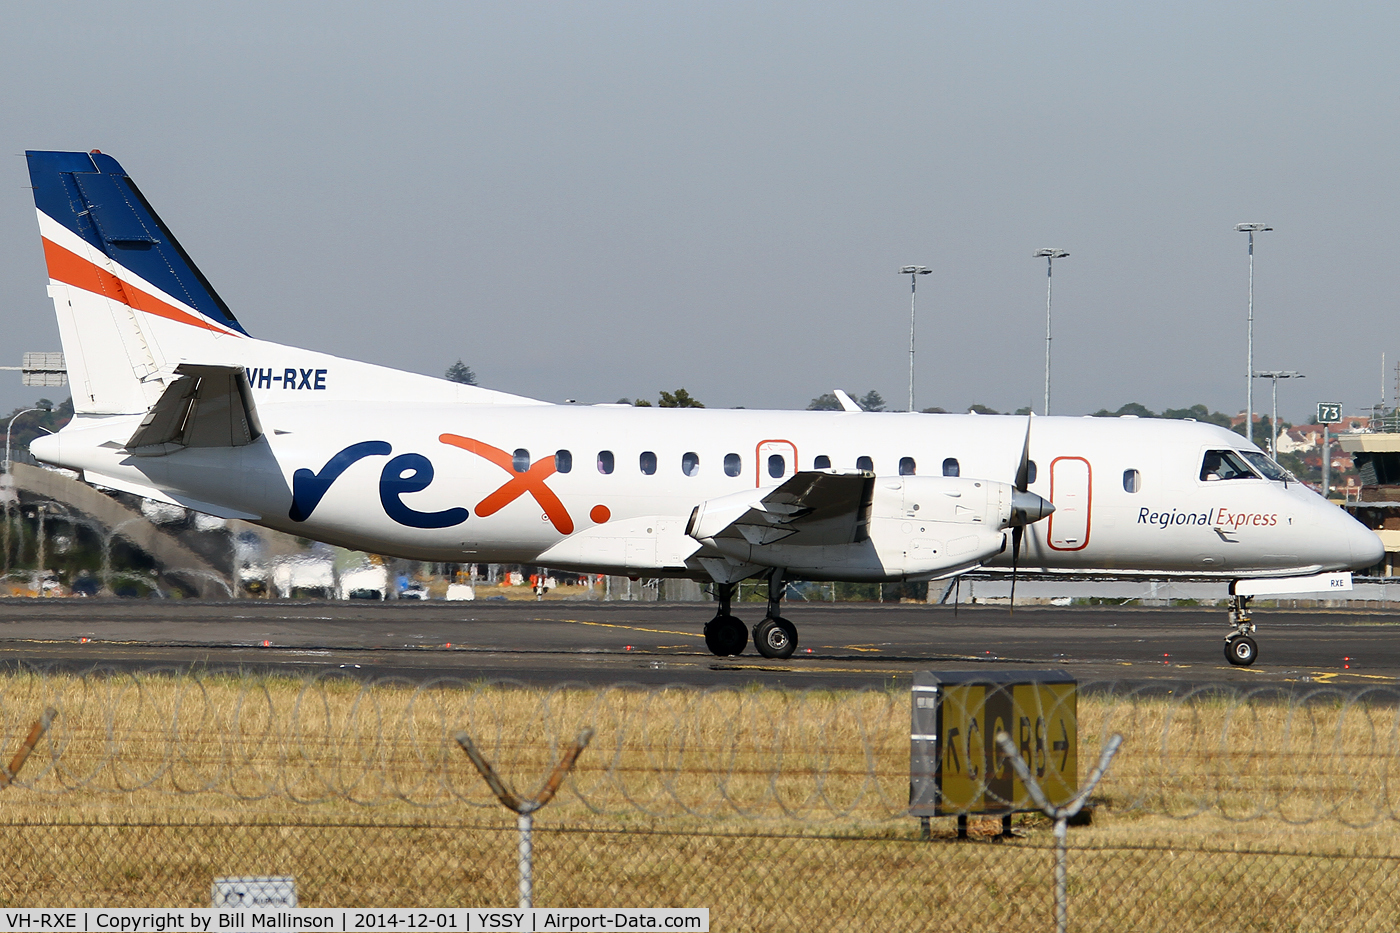 VH-RXE, 1991 Saab 340B C/N 340B-275, taxiing from 34R